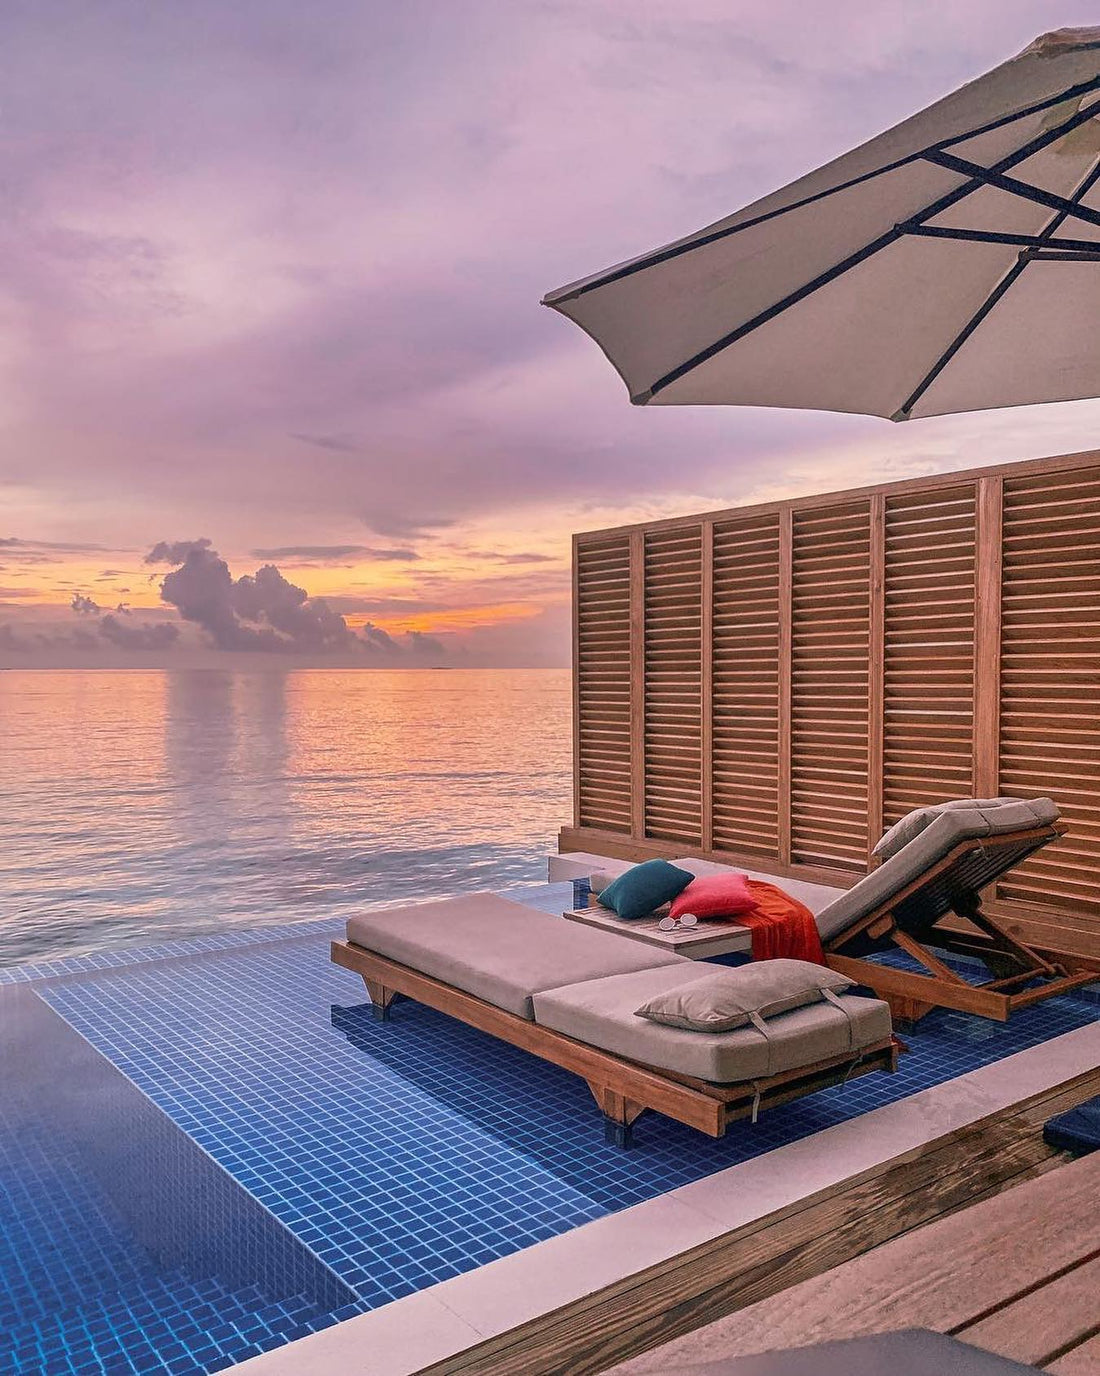 Emerald Collection’s second Maldives resort Emerald Faarufushi opens